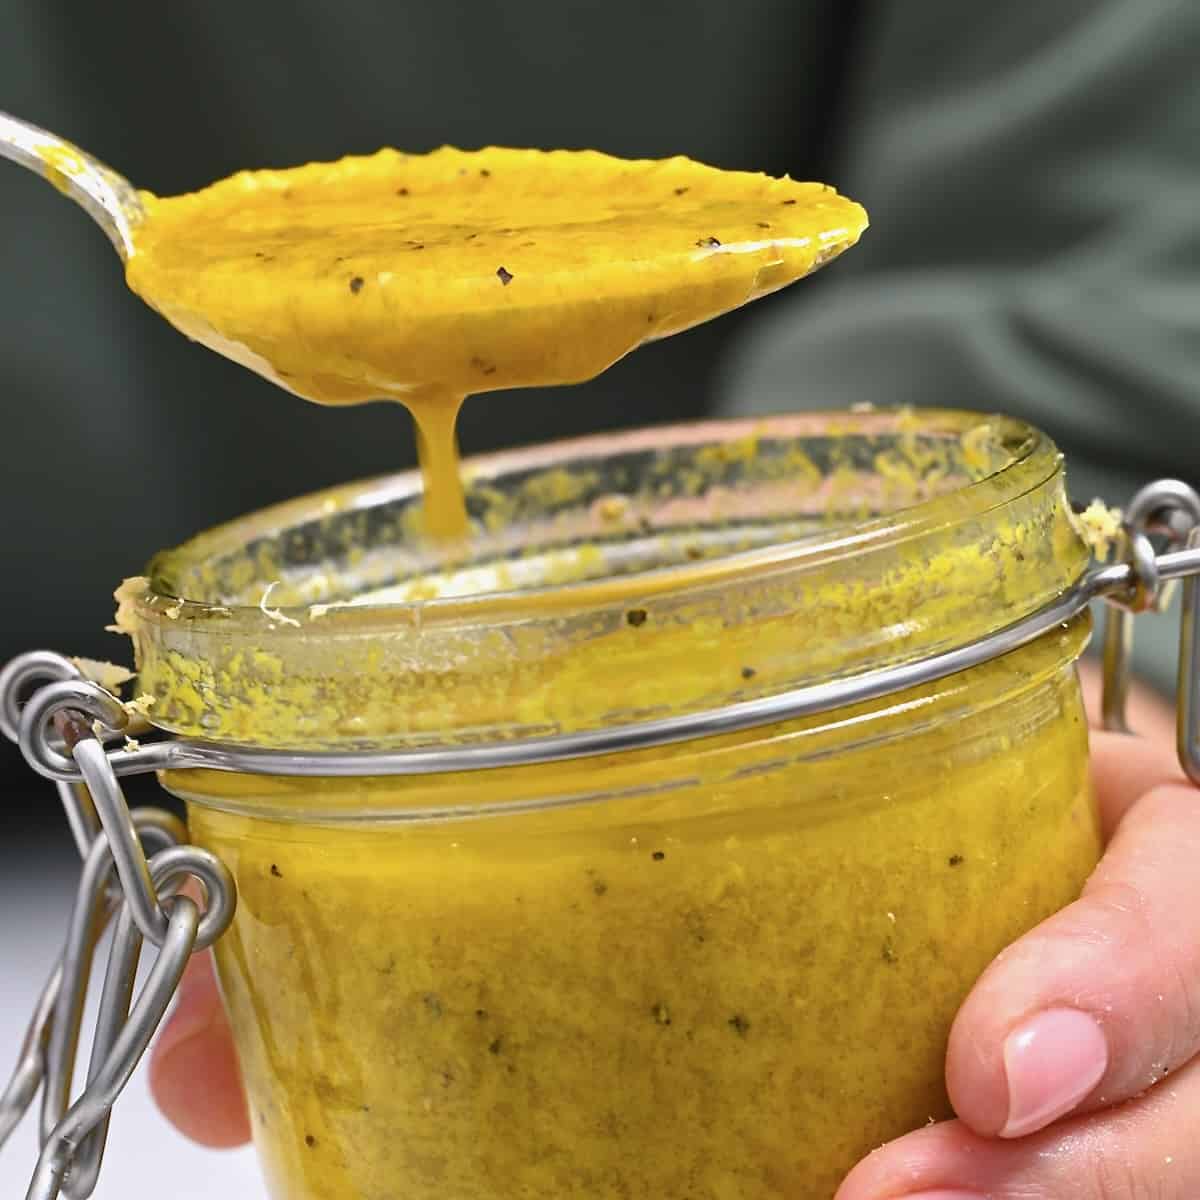 Homemade ginger salad dressing dripping from a spoon over a jar